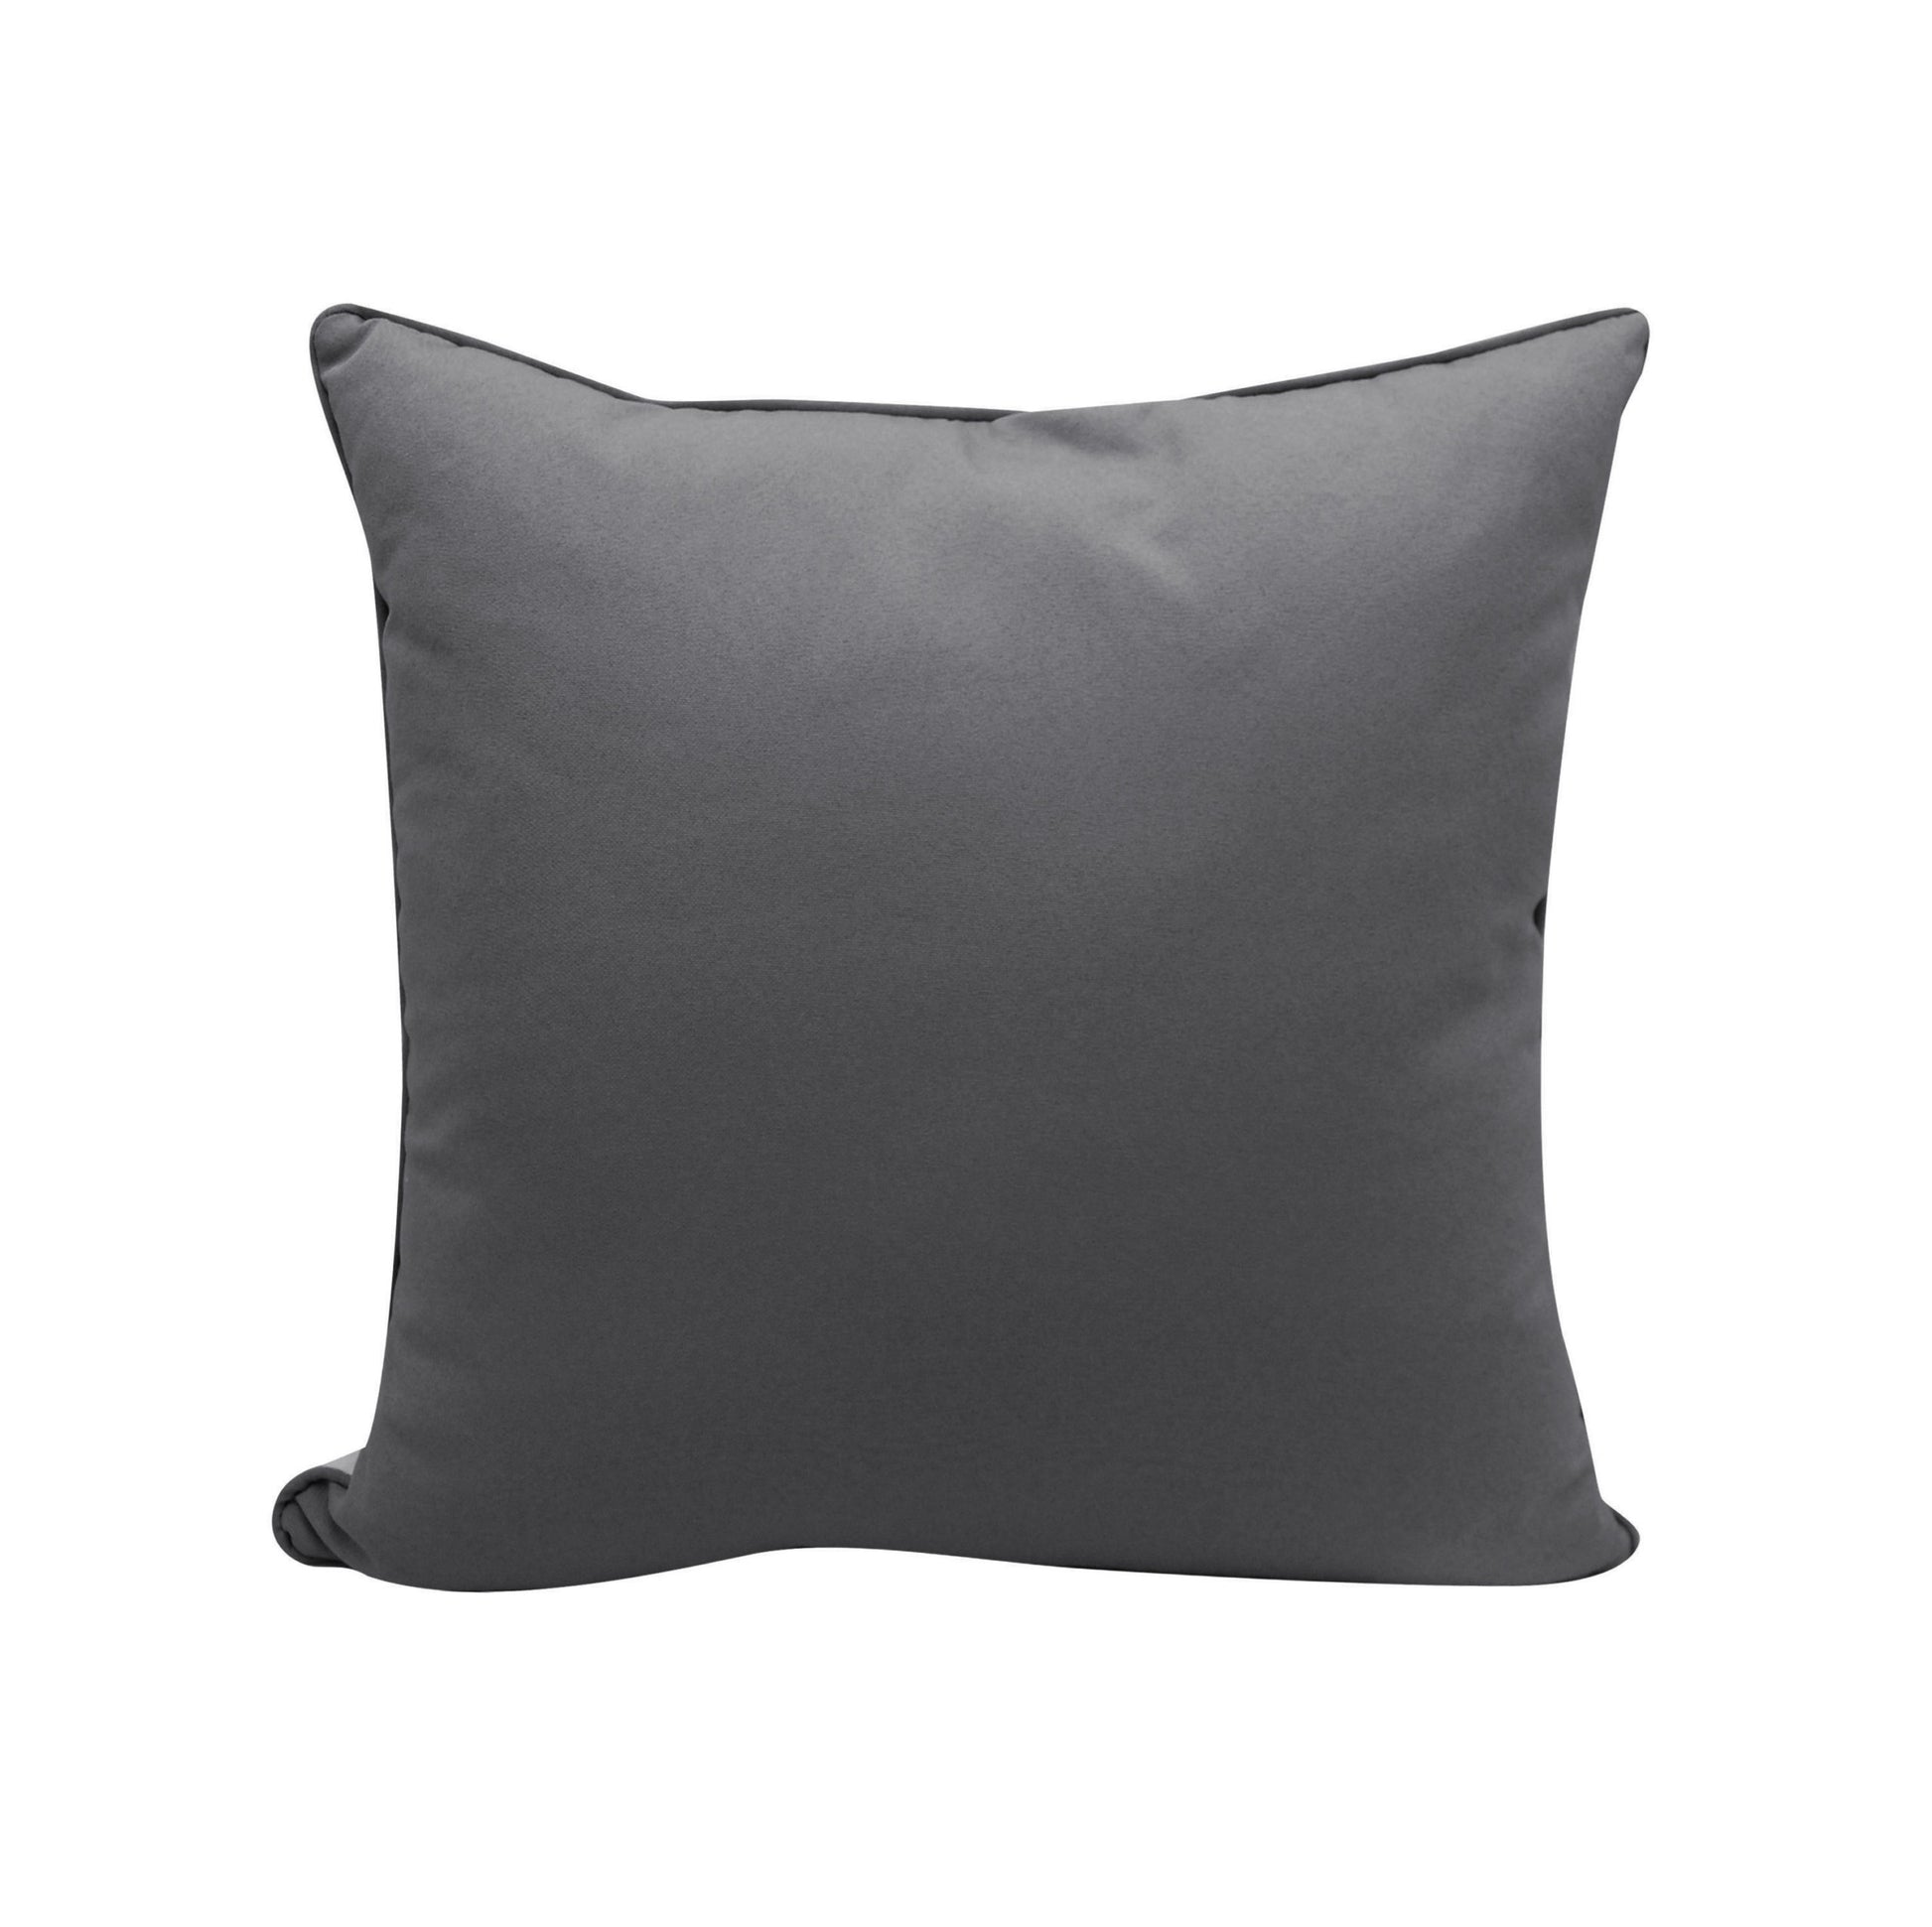 Solid grey fabric; back of the Head Strong equine pillow.